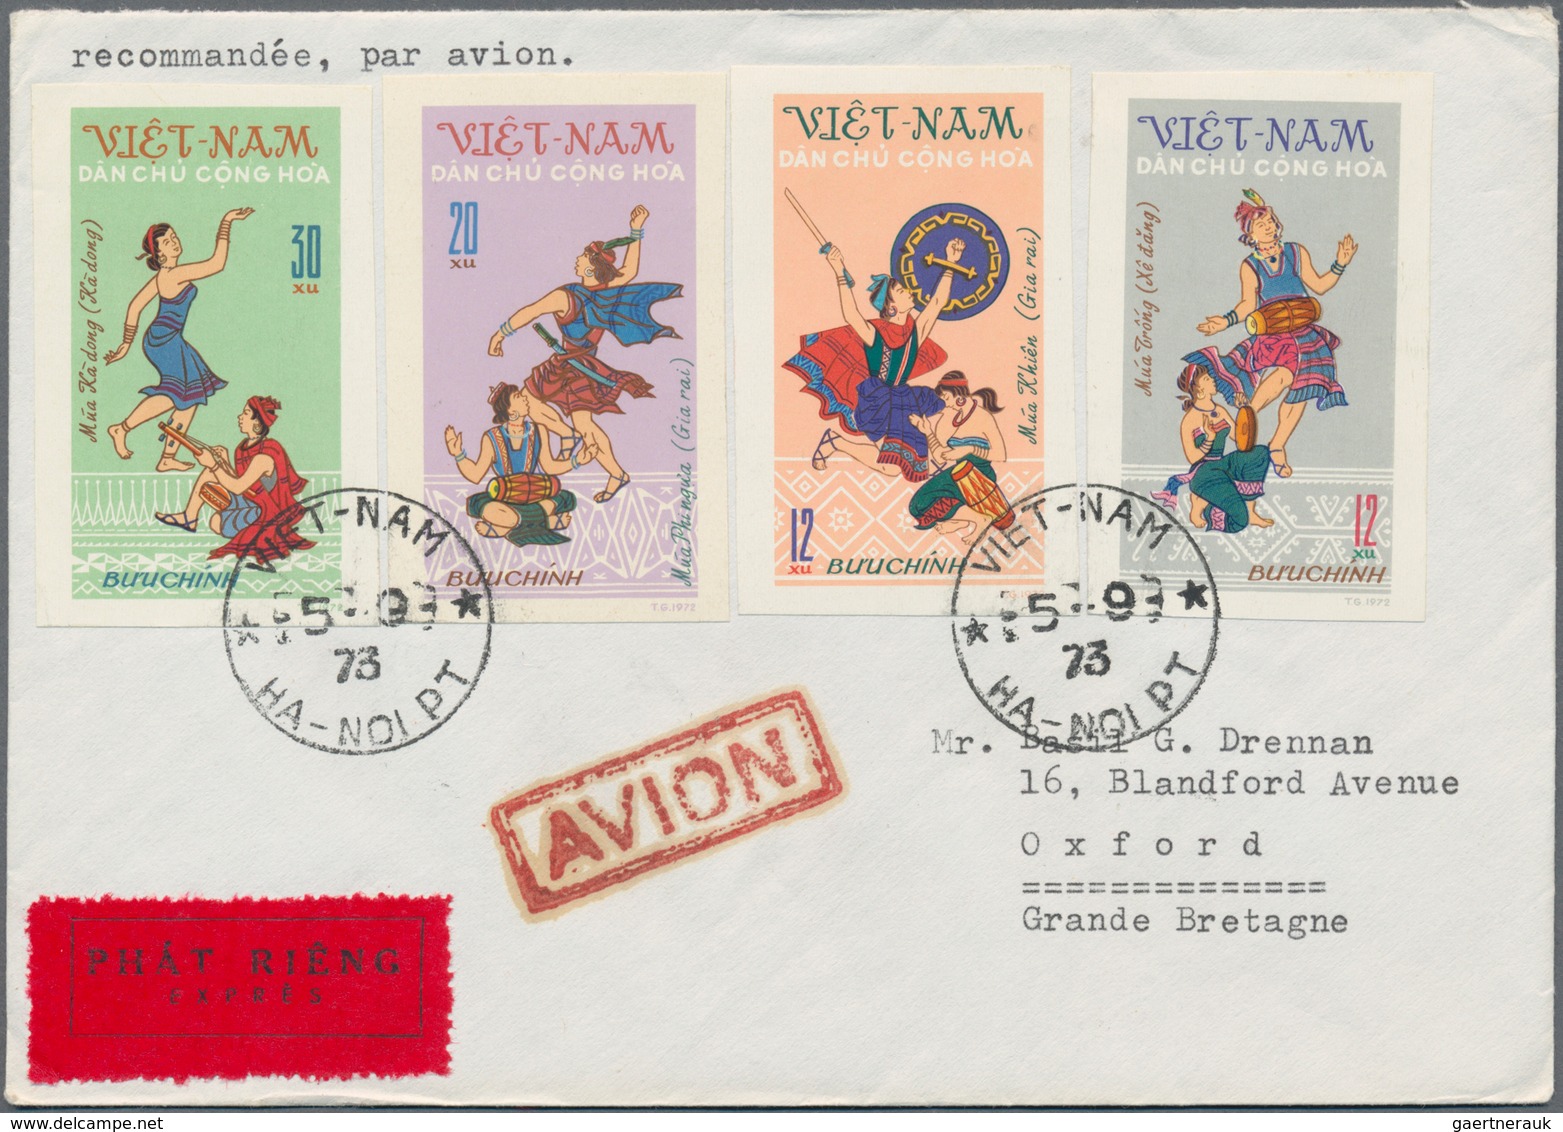 Vietnam-Nord (1945-1975): 1972/73, 30 Covers Addressed To Oxford, Great Britain, Mostly Express Airm - Vietnam